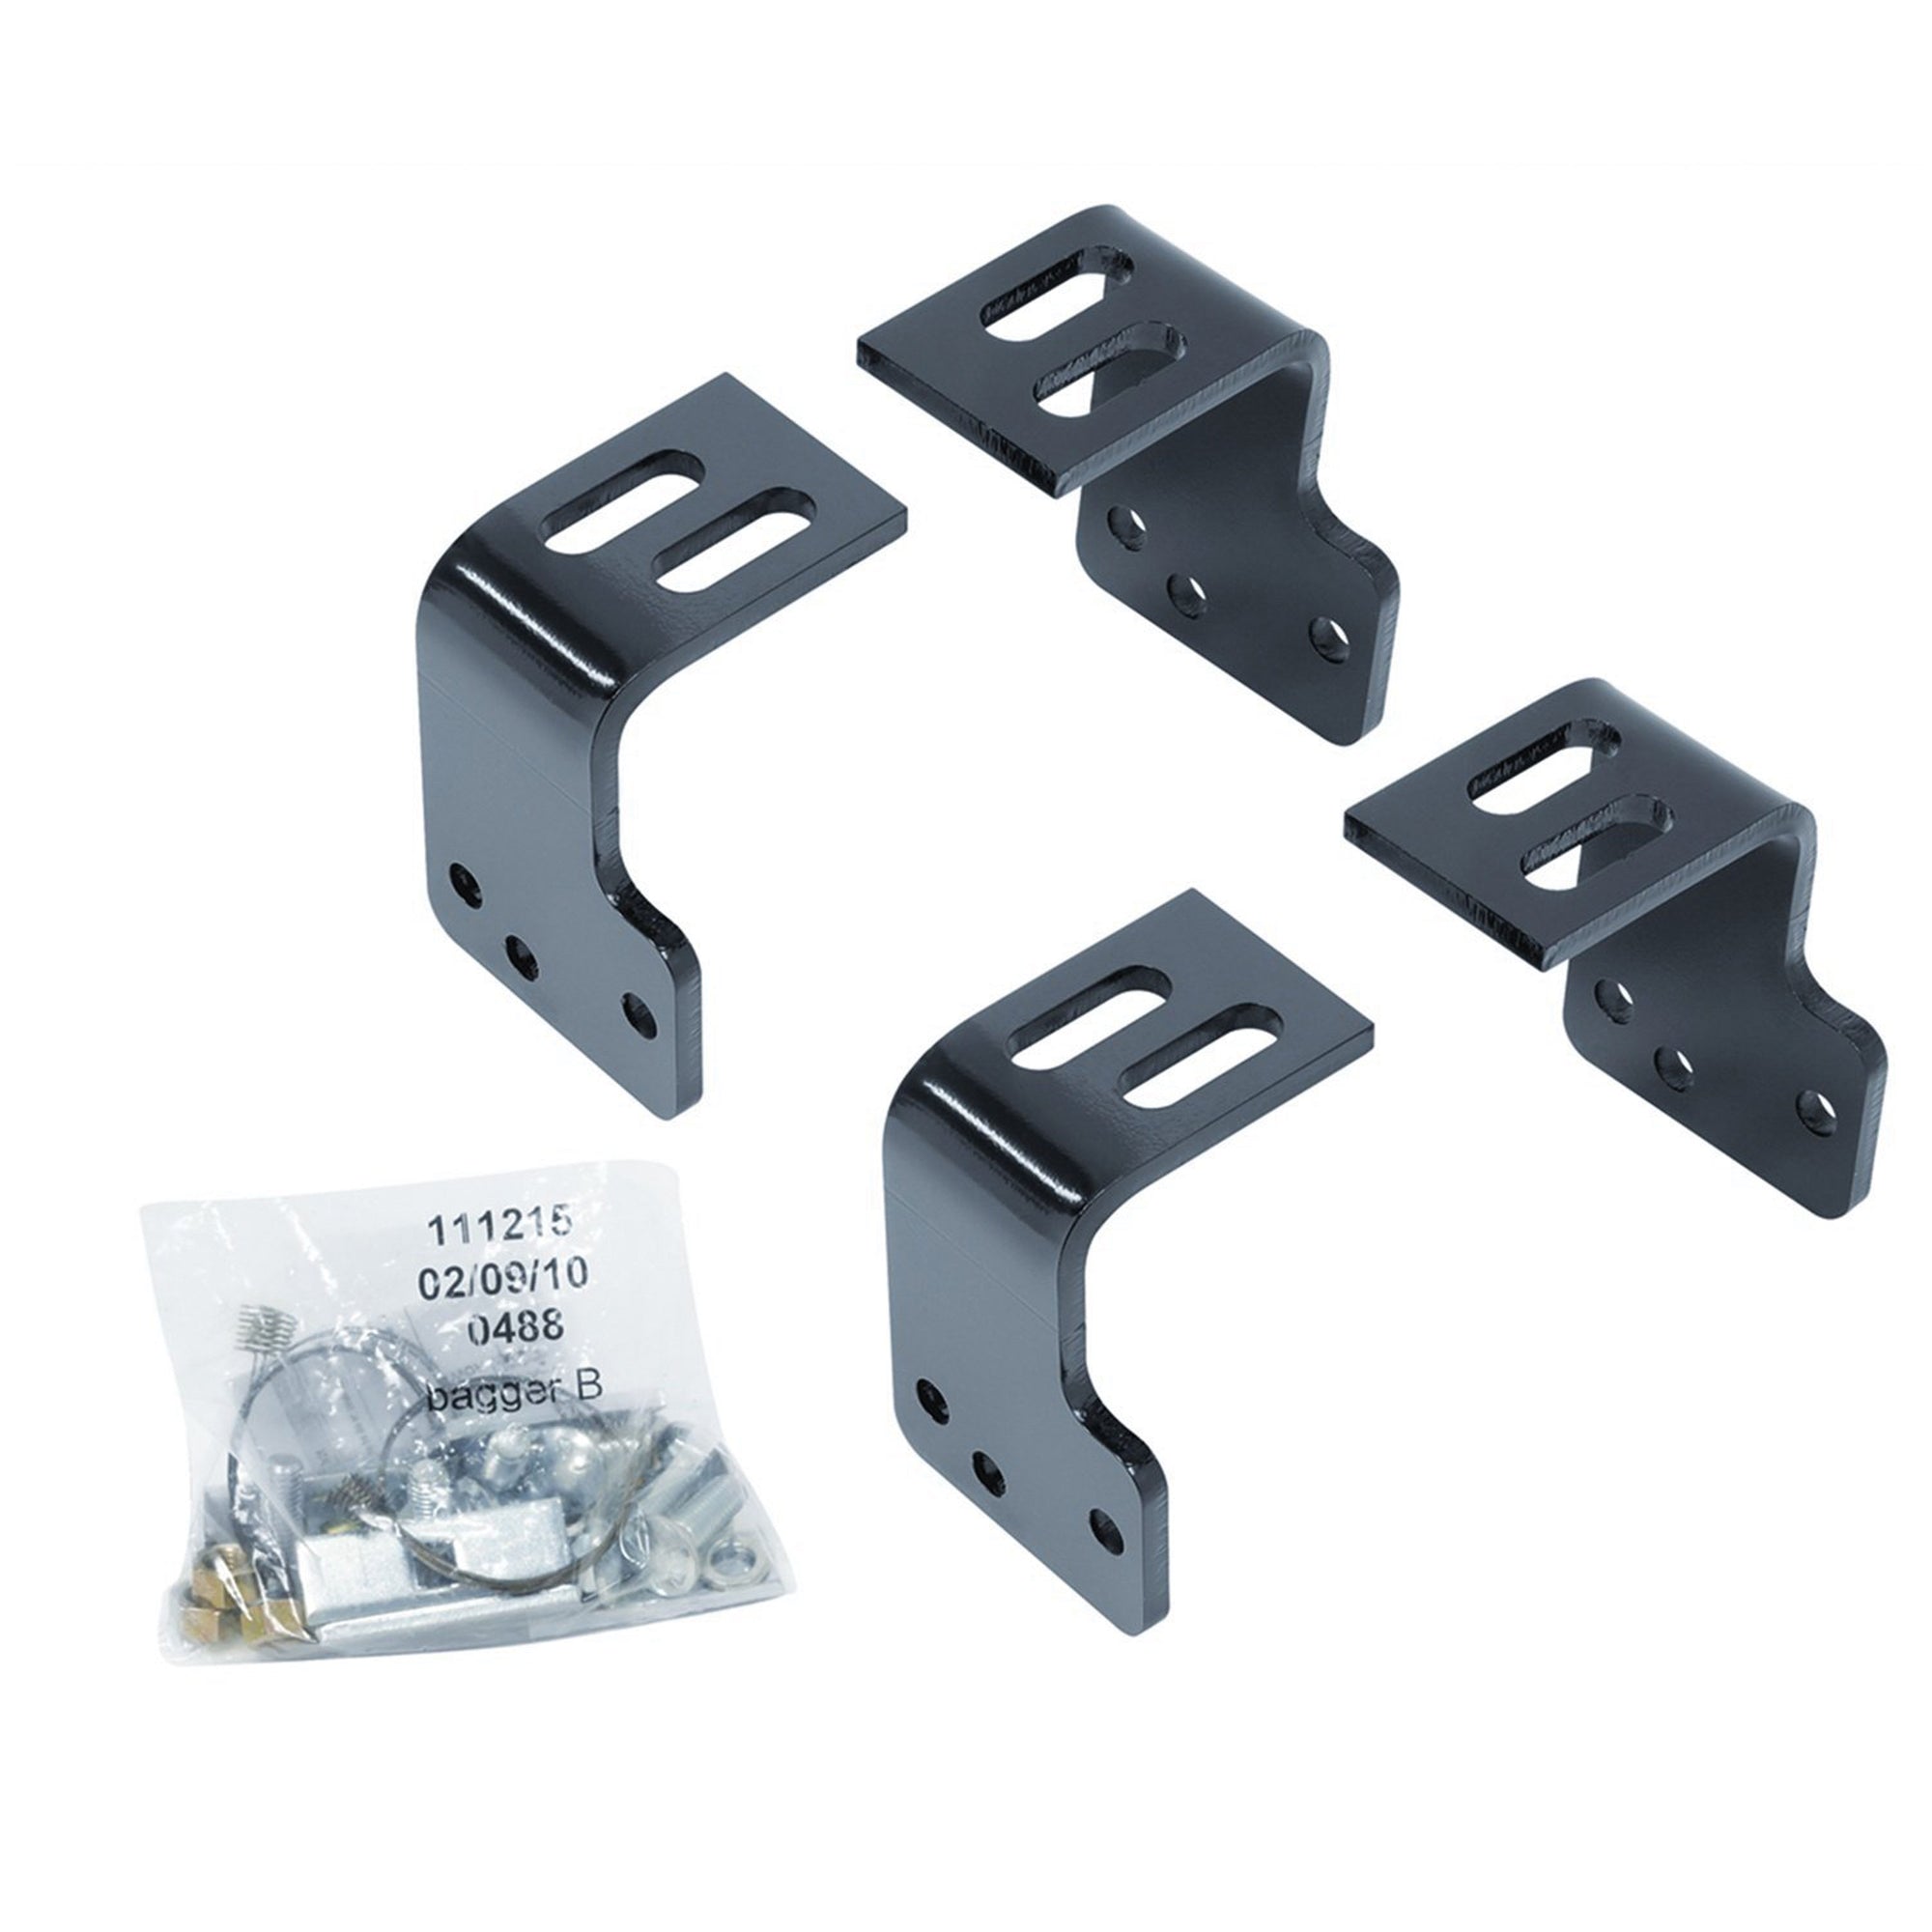 Reese 58426 Fifth Wheel Bracket Kit for #30035 and #30095 - Fits Ford F-150 (2004-2014)